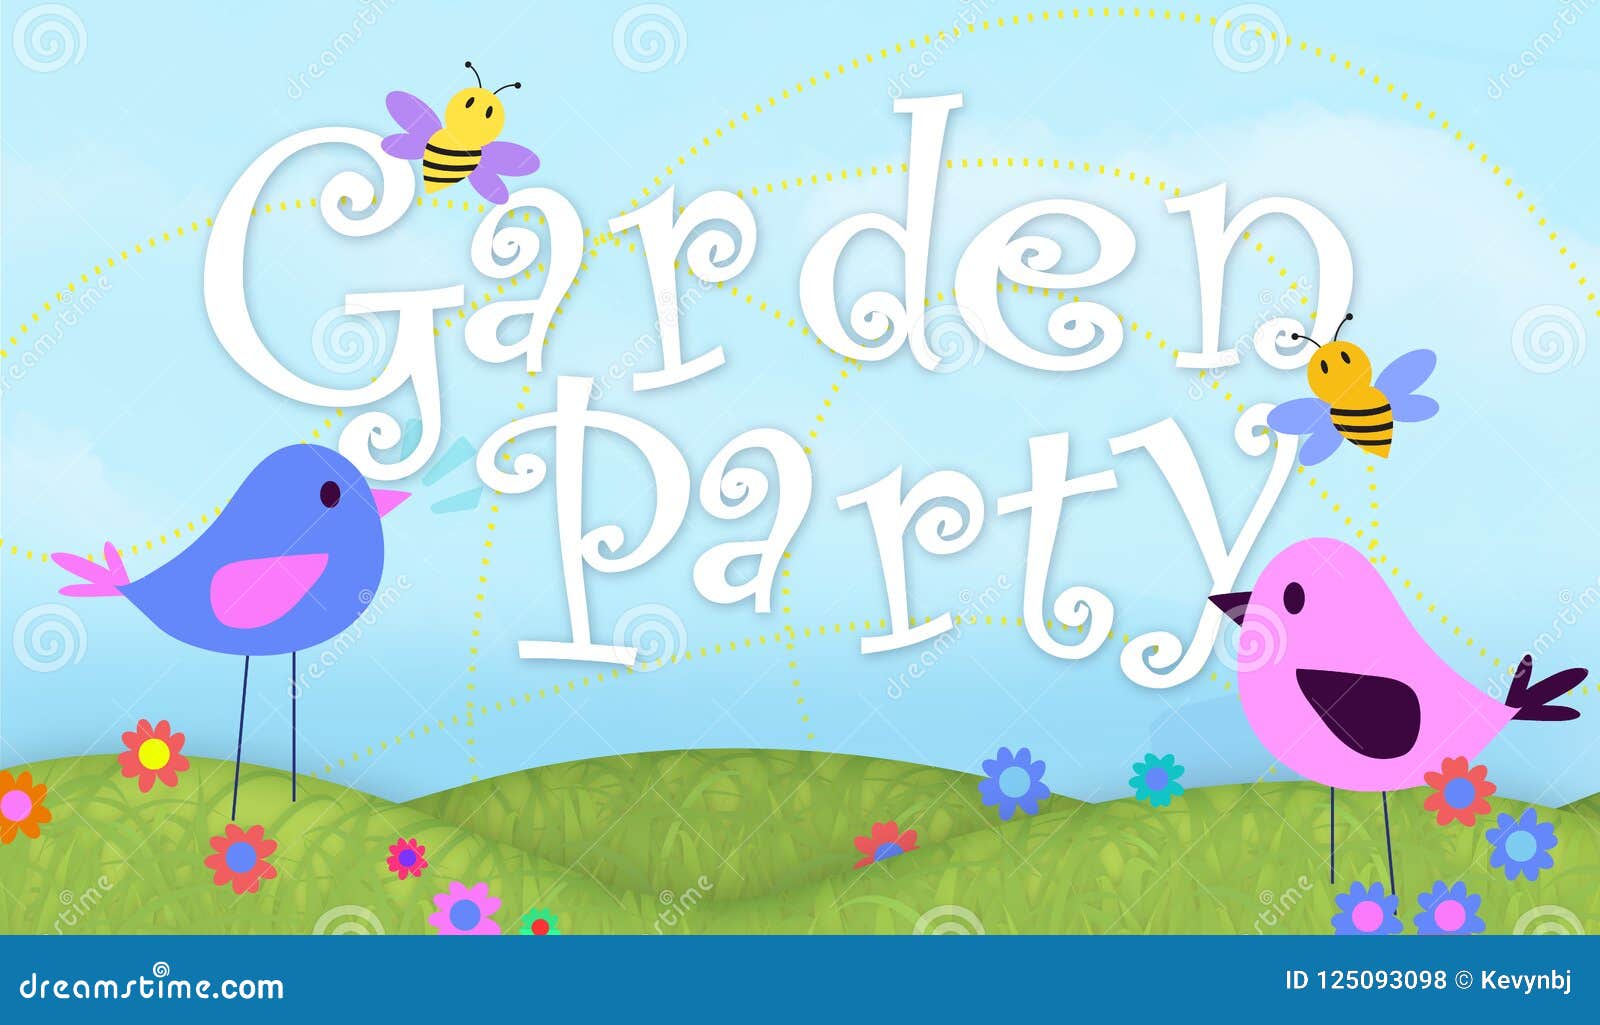 Garden Party Invitation Art With Birds And Bees Illustration Stock Illustration Illustration Of Grass Lawn 125093098